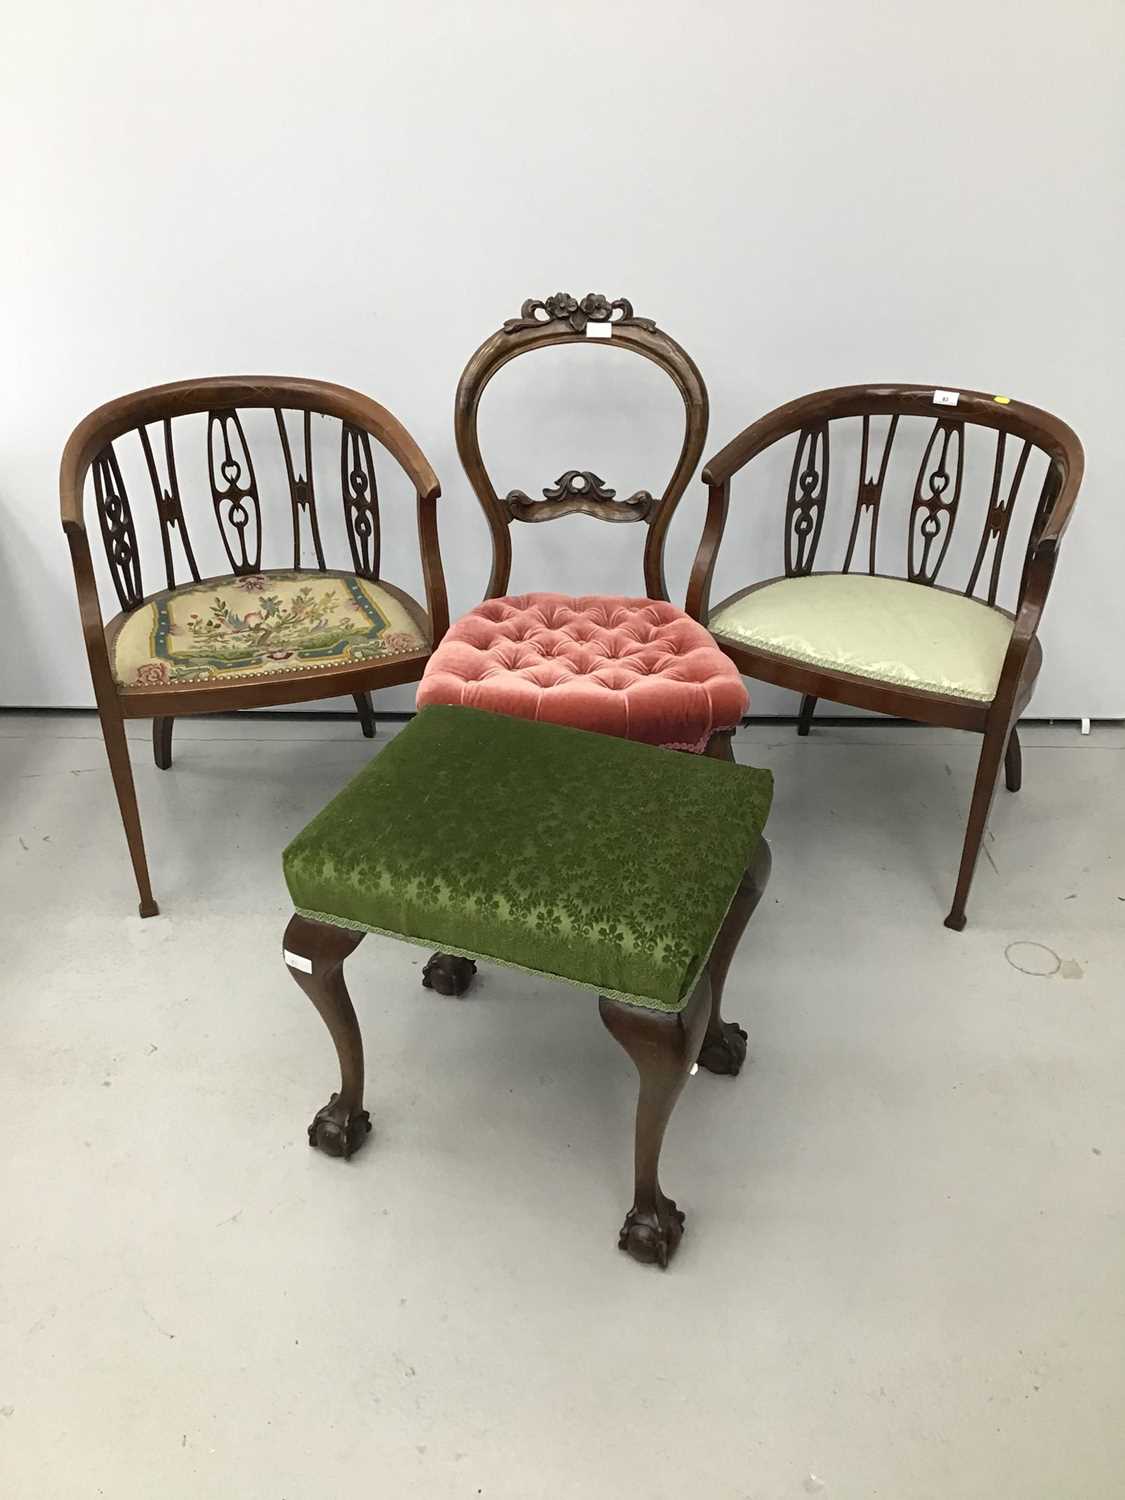 Lot 83 - A pair of Edwardian mahogany tub chairs, together with a Victorian prie-dieu chair, a Victorian dining chair and Georgian style stool